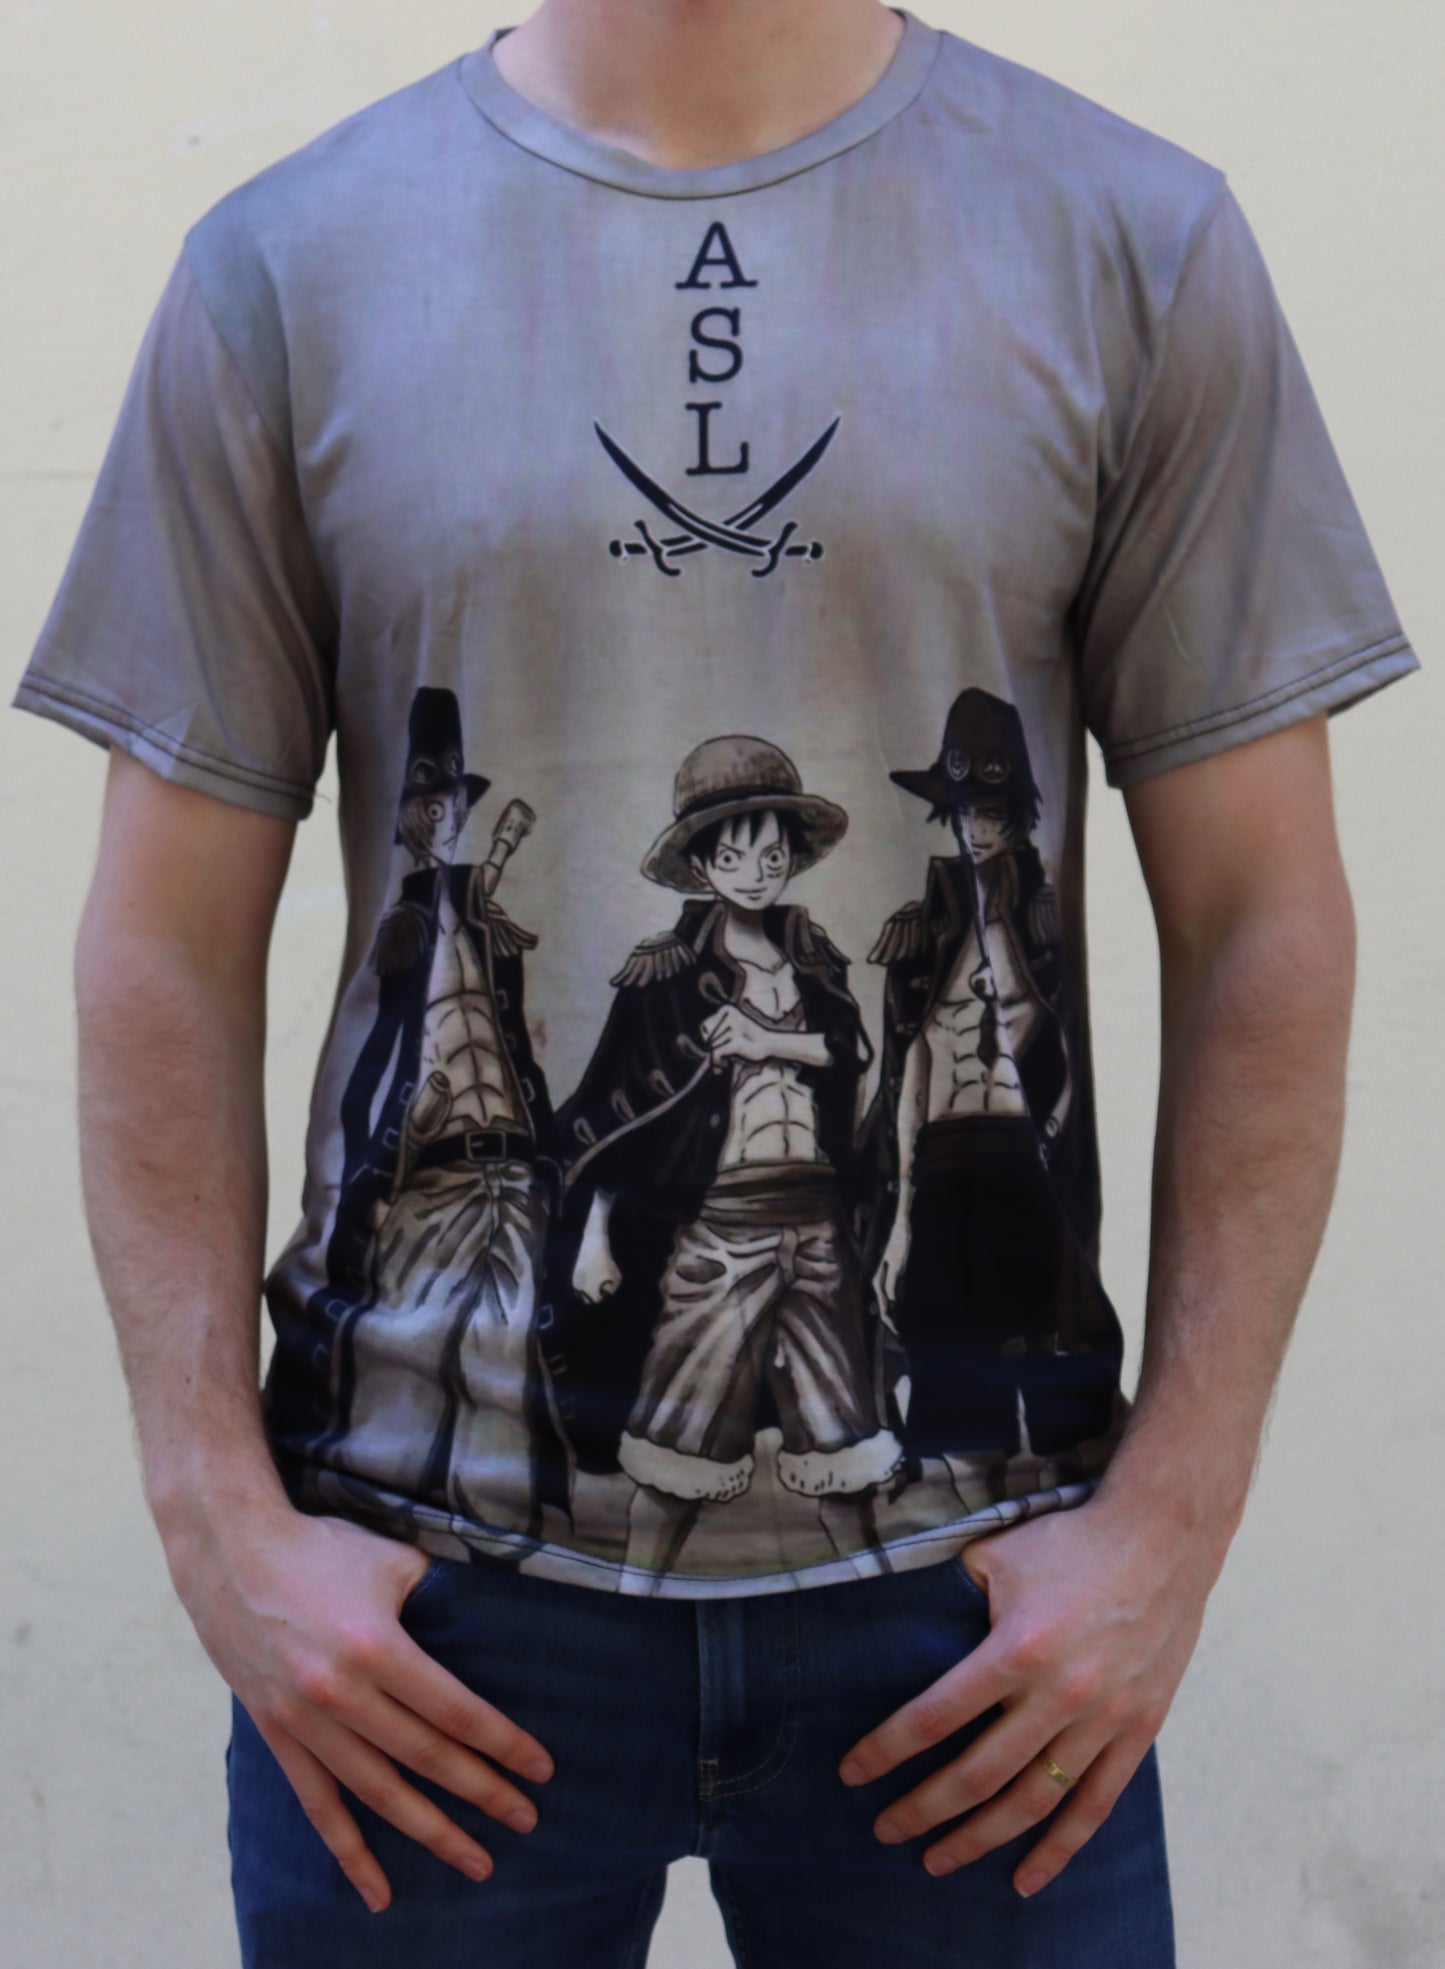 One Piece - Ace x Sabo x Luffy TShirt (Price Does Not Include Shipping - Please Read Description)